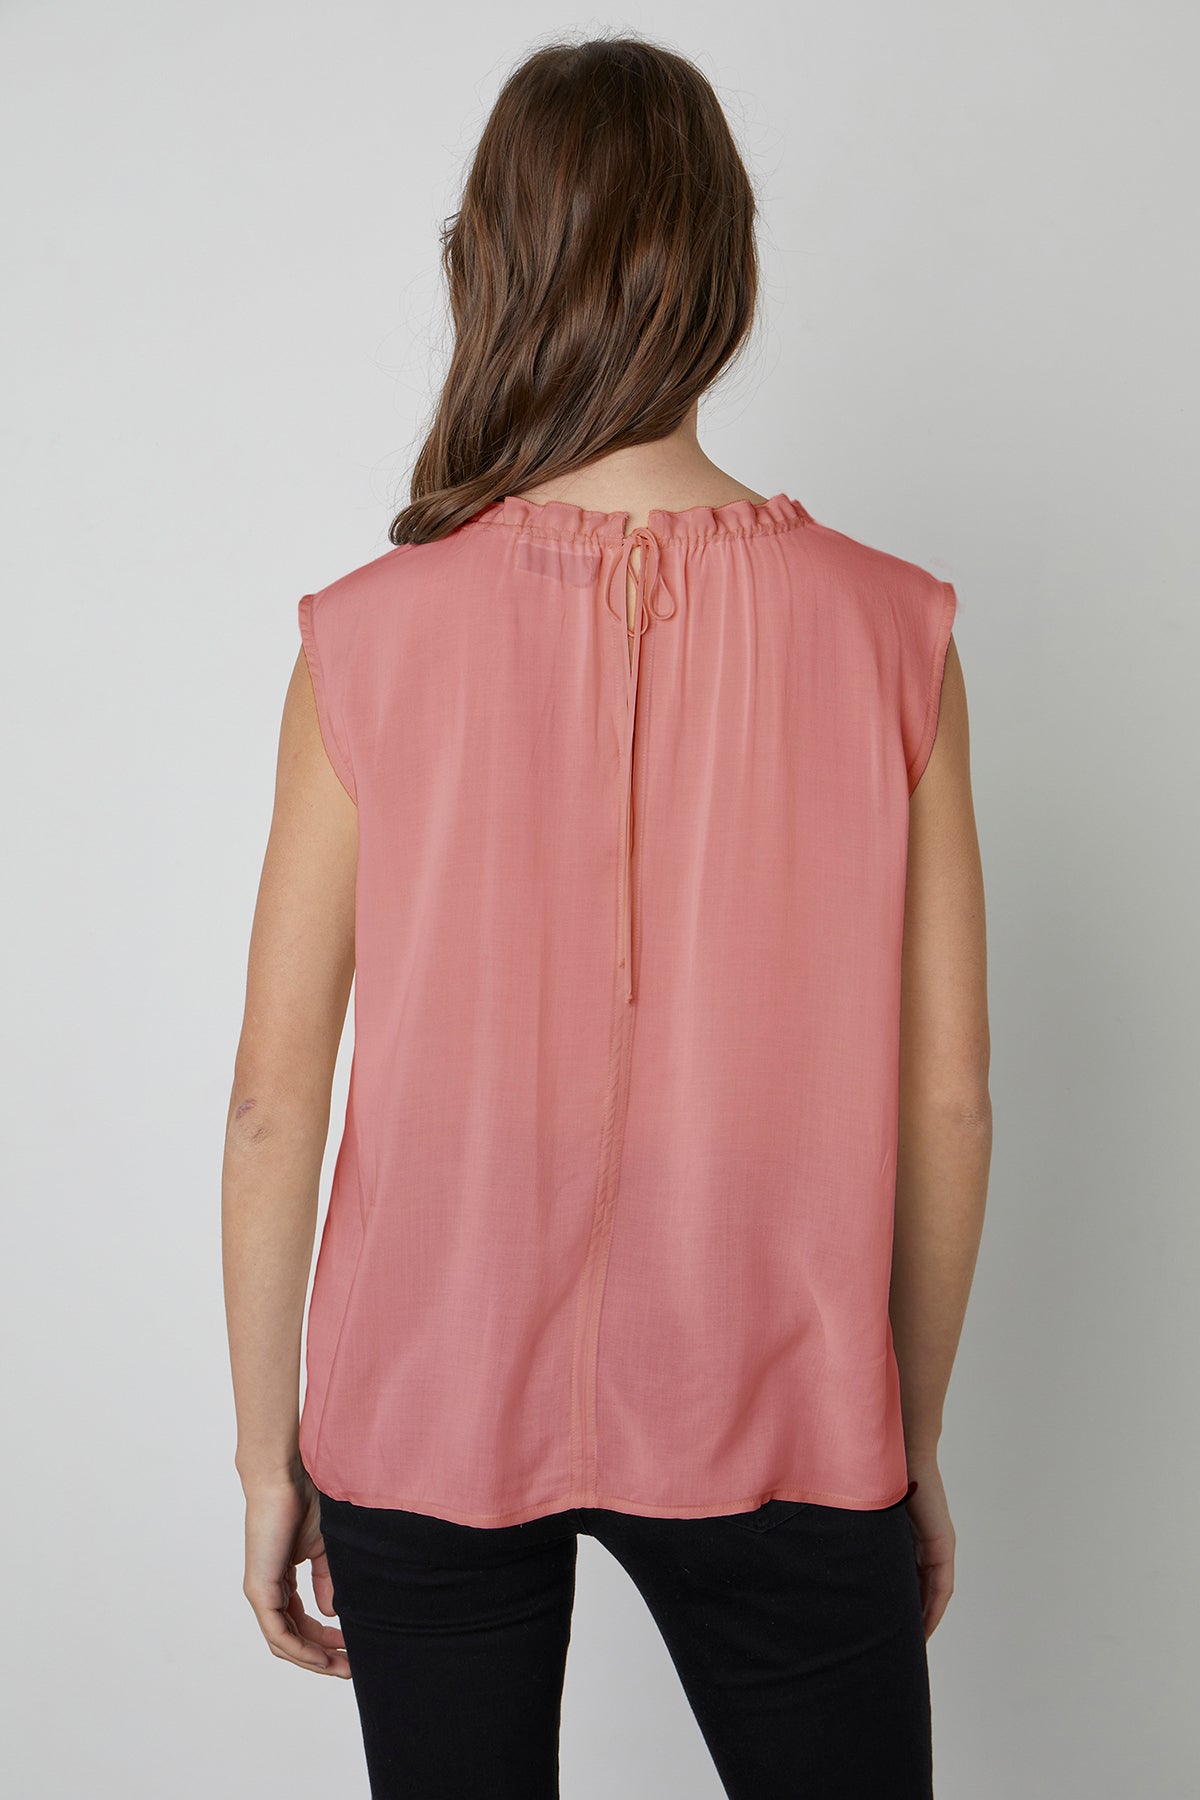 Wenna Sleeveless Blouse in Scallop Back-24782499152065